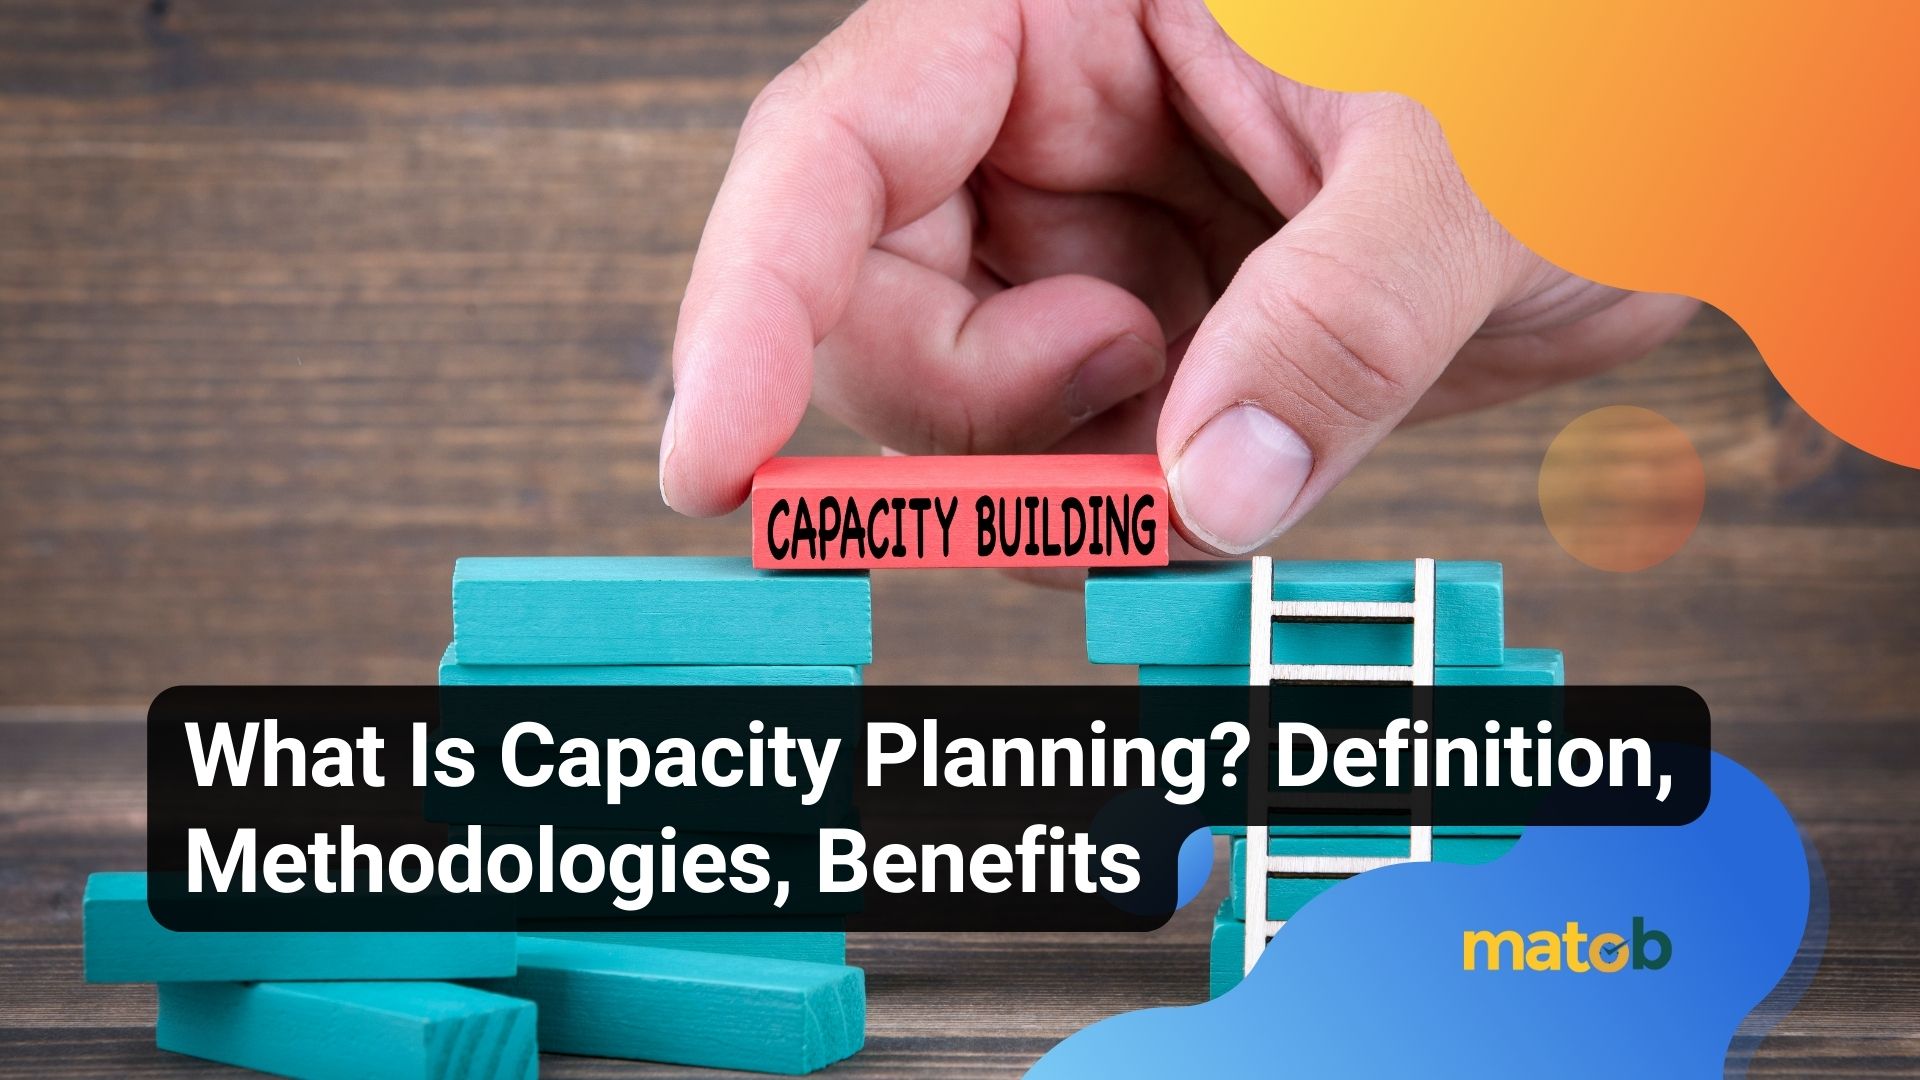 What Is Capacity Planning? Definition, Methodologies, Benefits